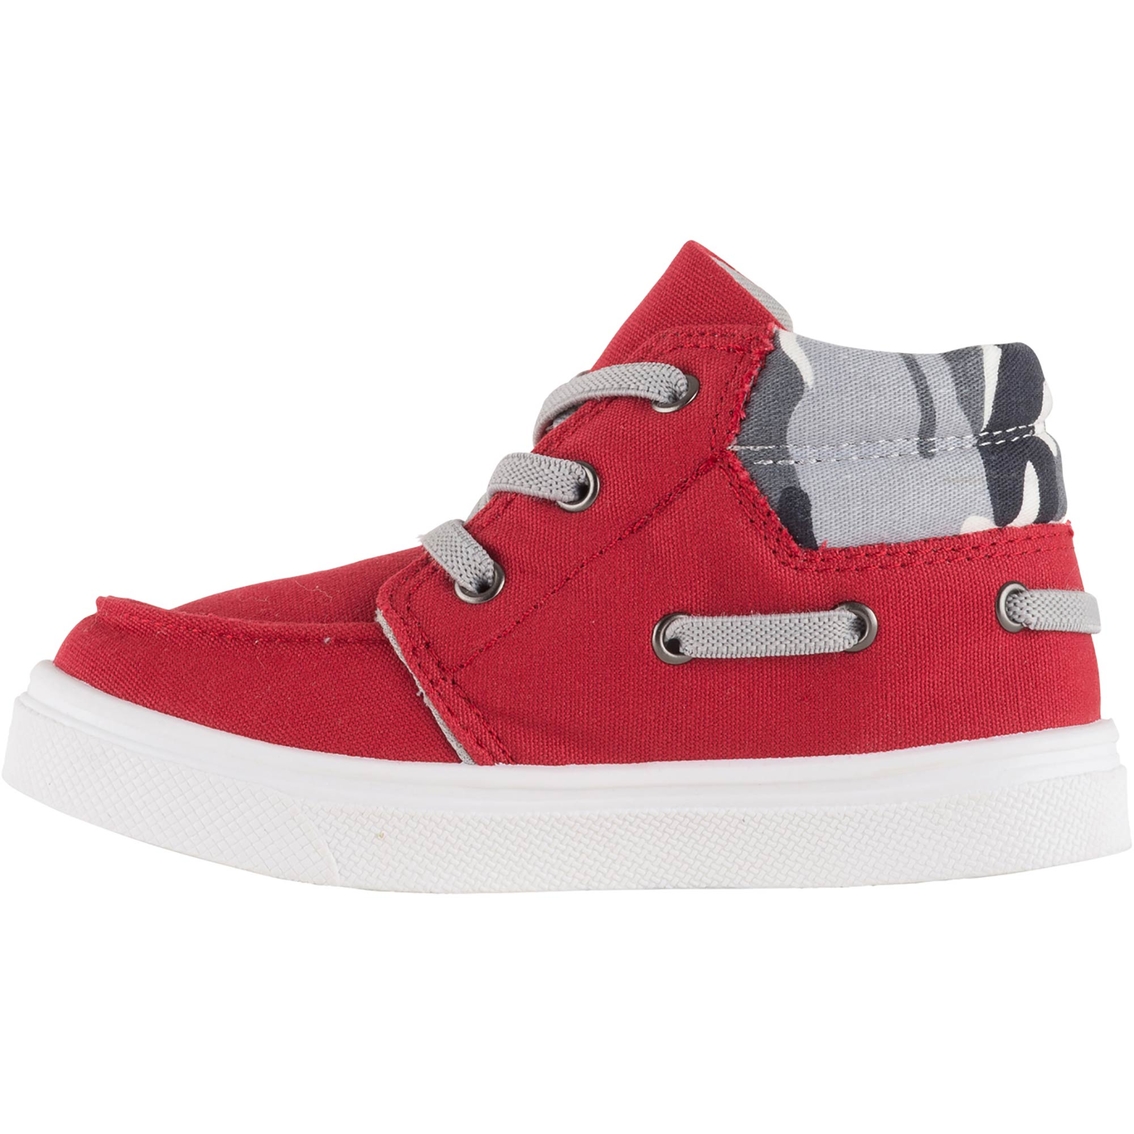 Oomphies Toddler Boys Riley High Top Shoes | Children's Athletic Shoes ...